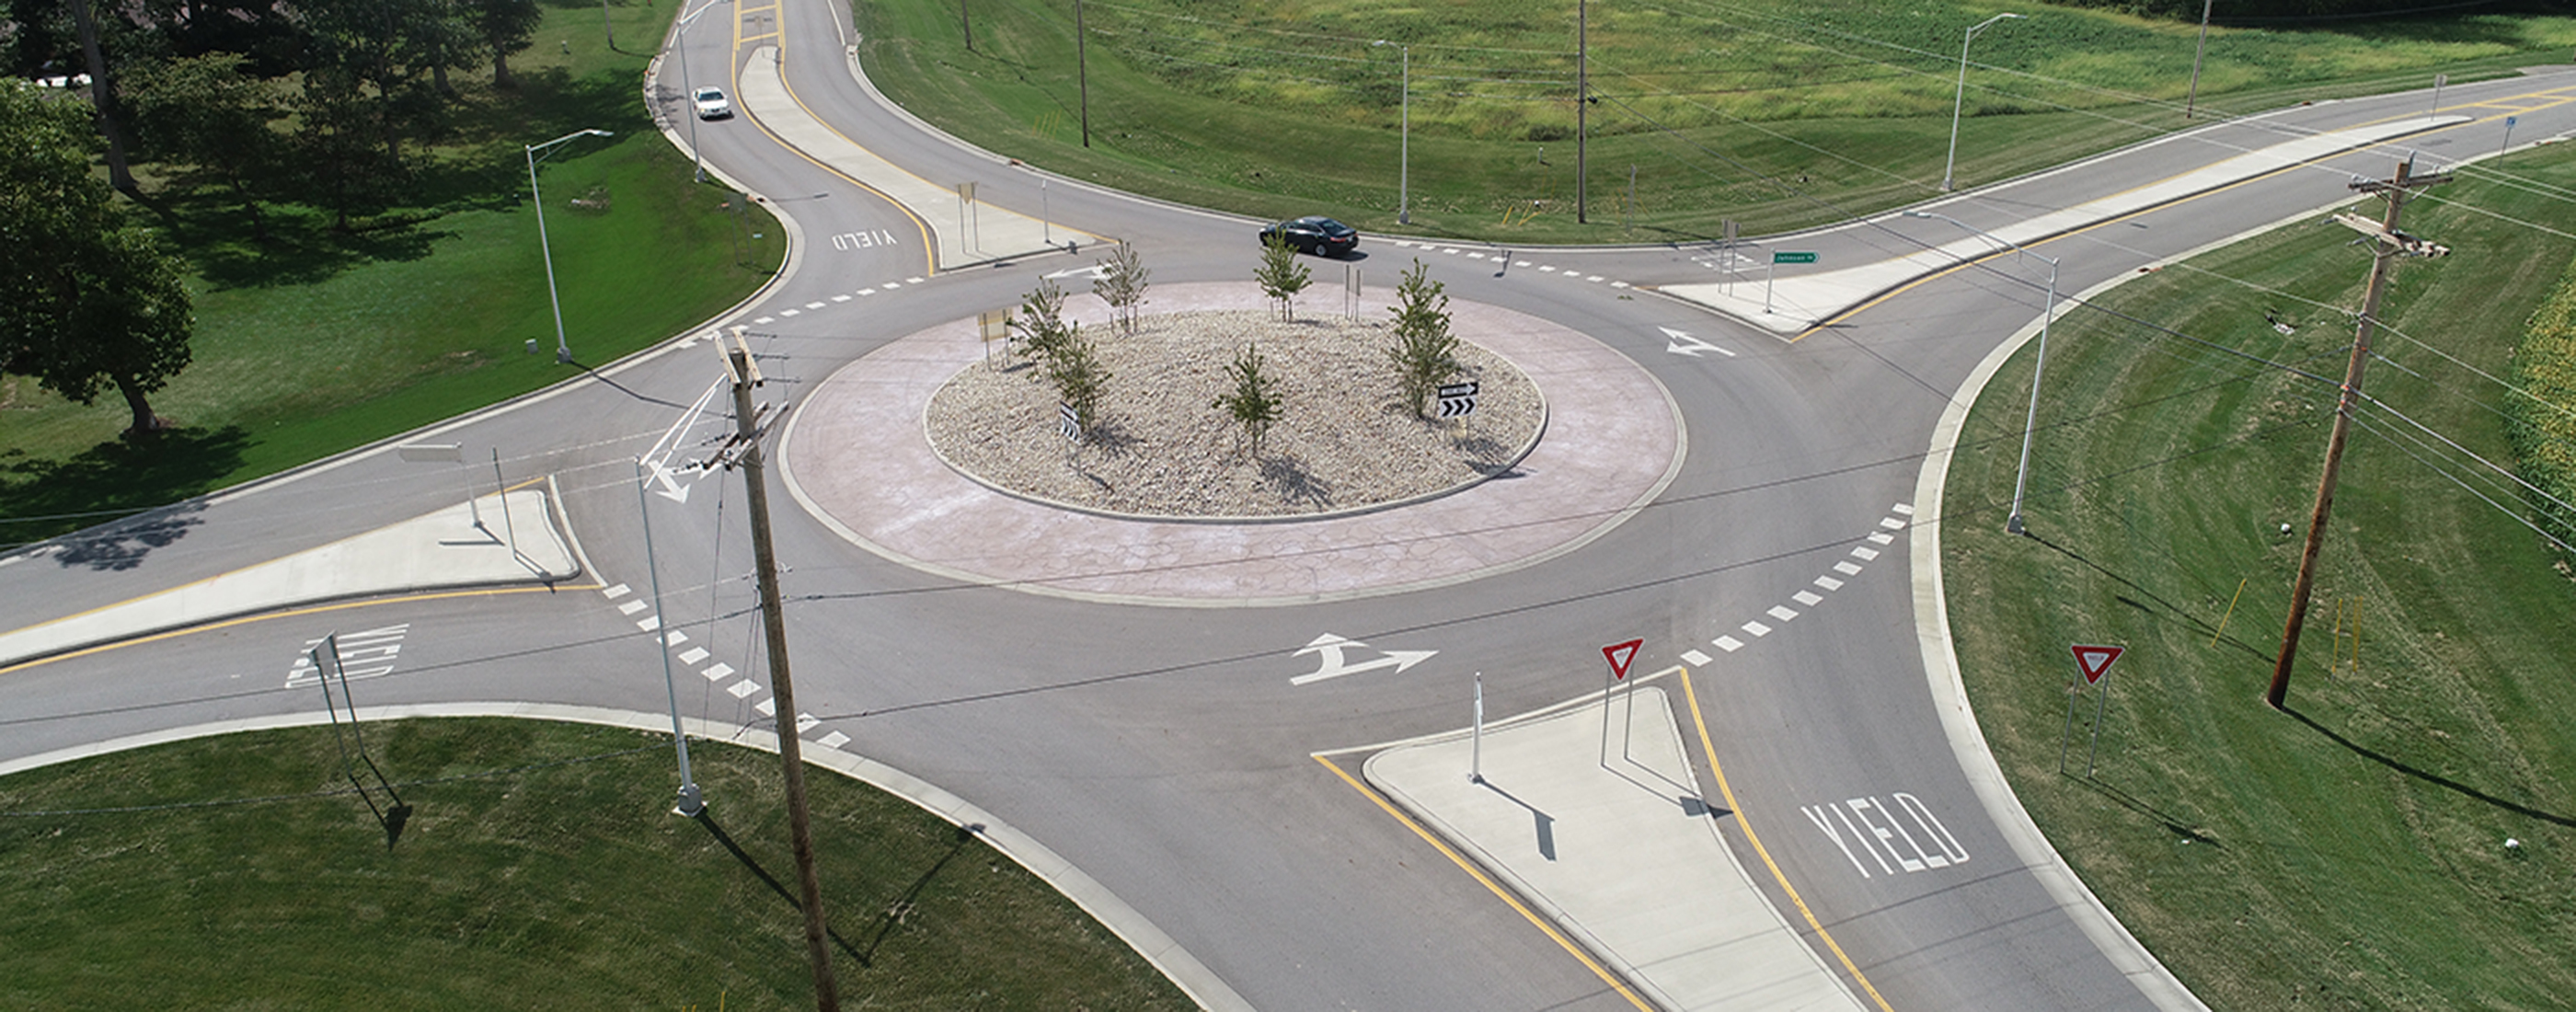 The new single-lane roundabout at Norton and Johnson Road in Franklin County, OH